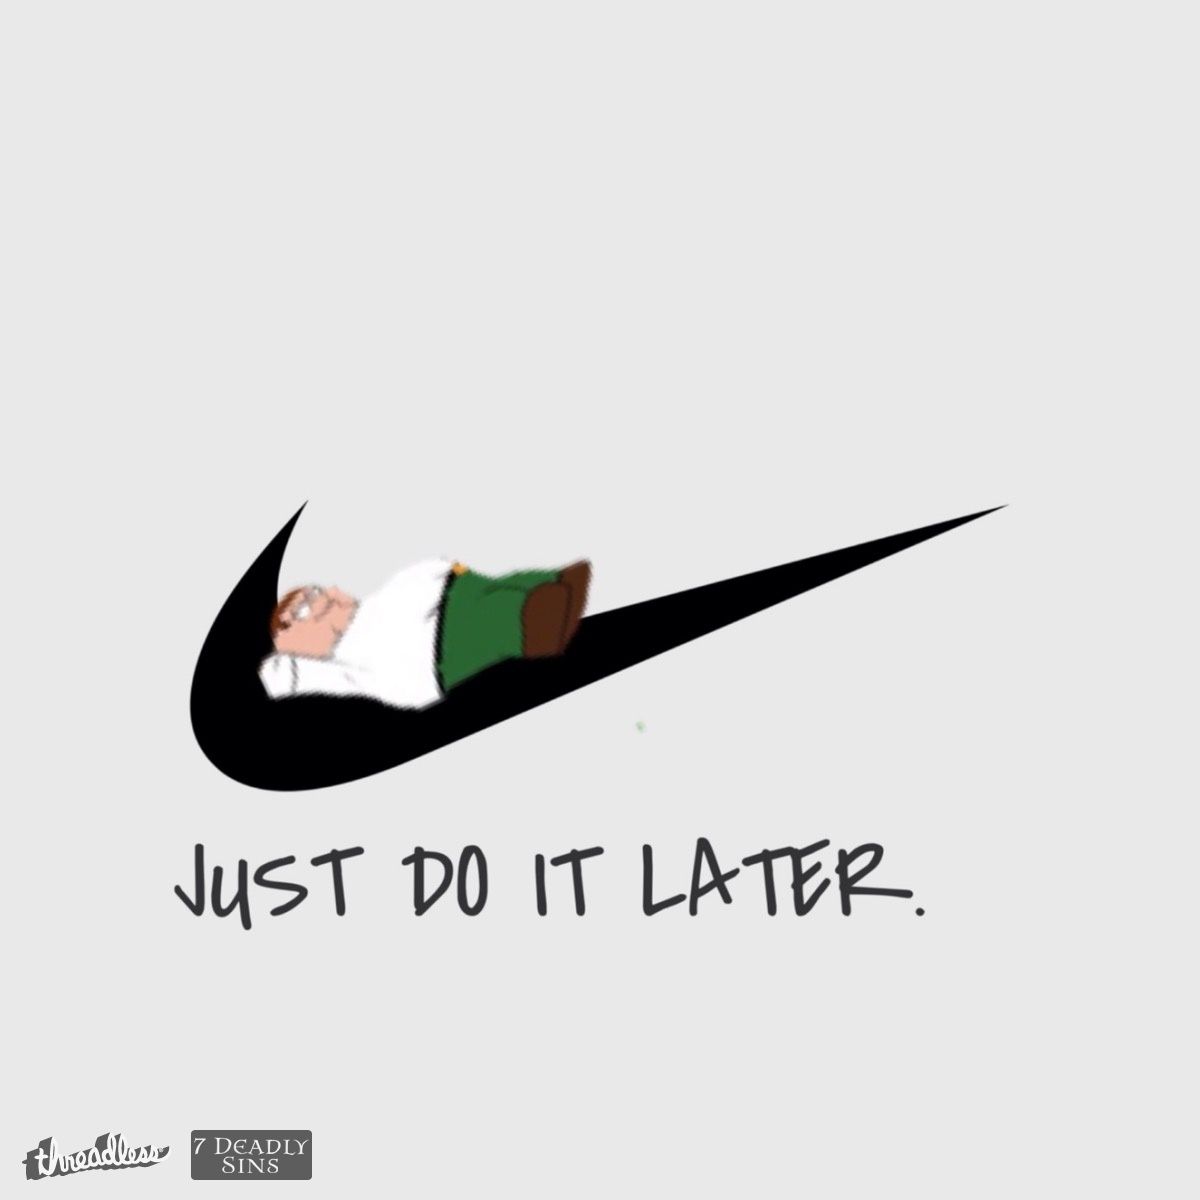 Score Just Do It Later by simplecherry on Threadless